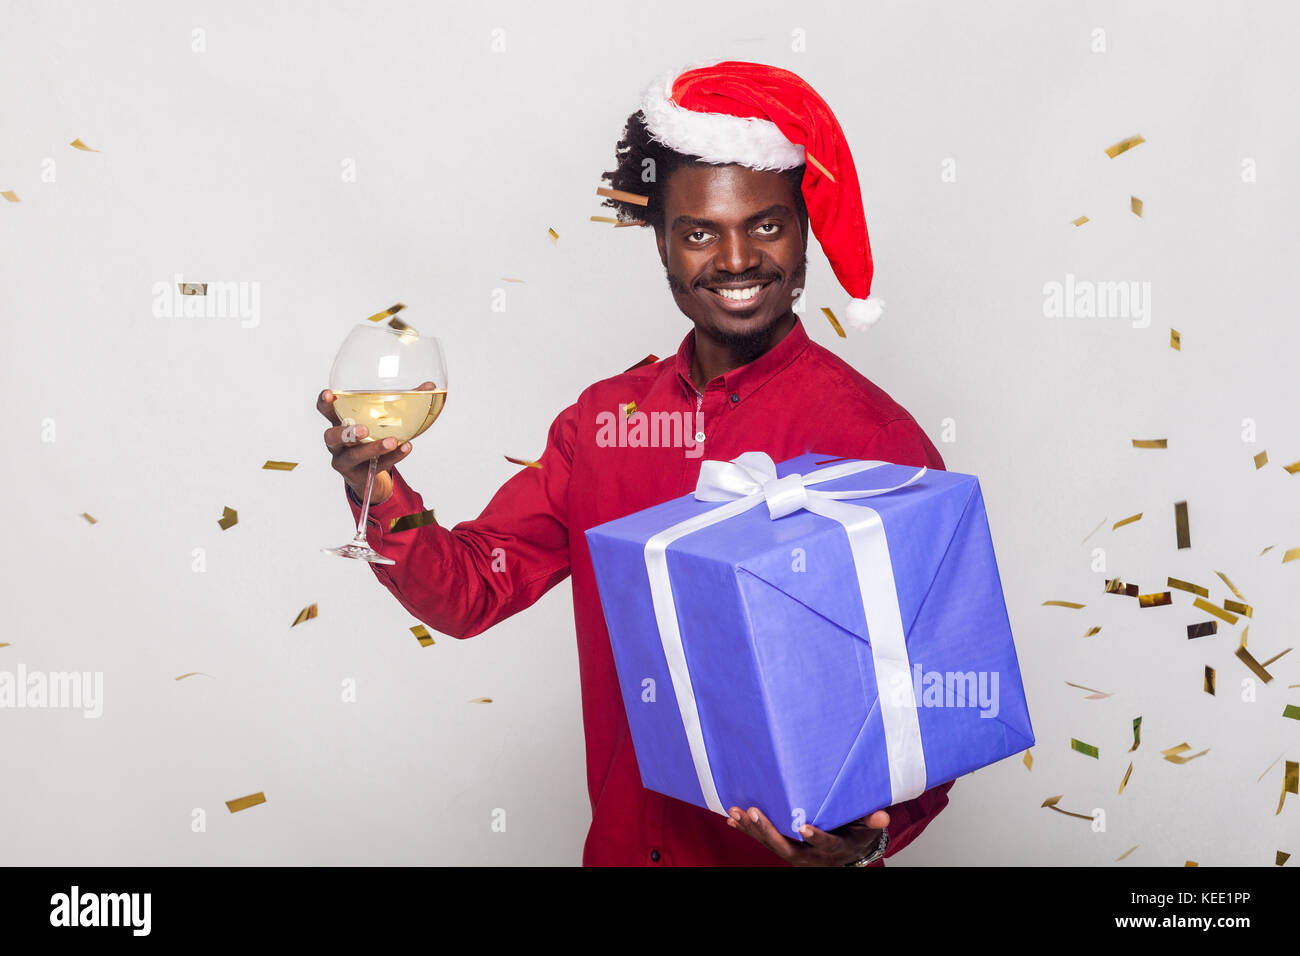 Around happiness afro man in red cap, flies gold metaphane, man holding champagne glass and gift box, looking at camera and toothy smiling. Studio sho Stock Photo